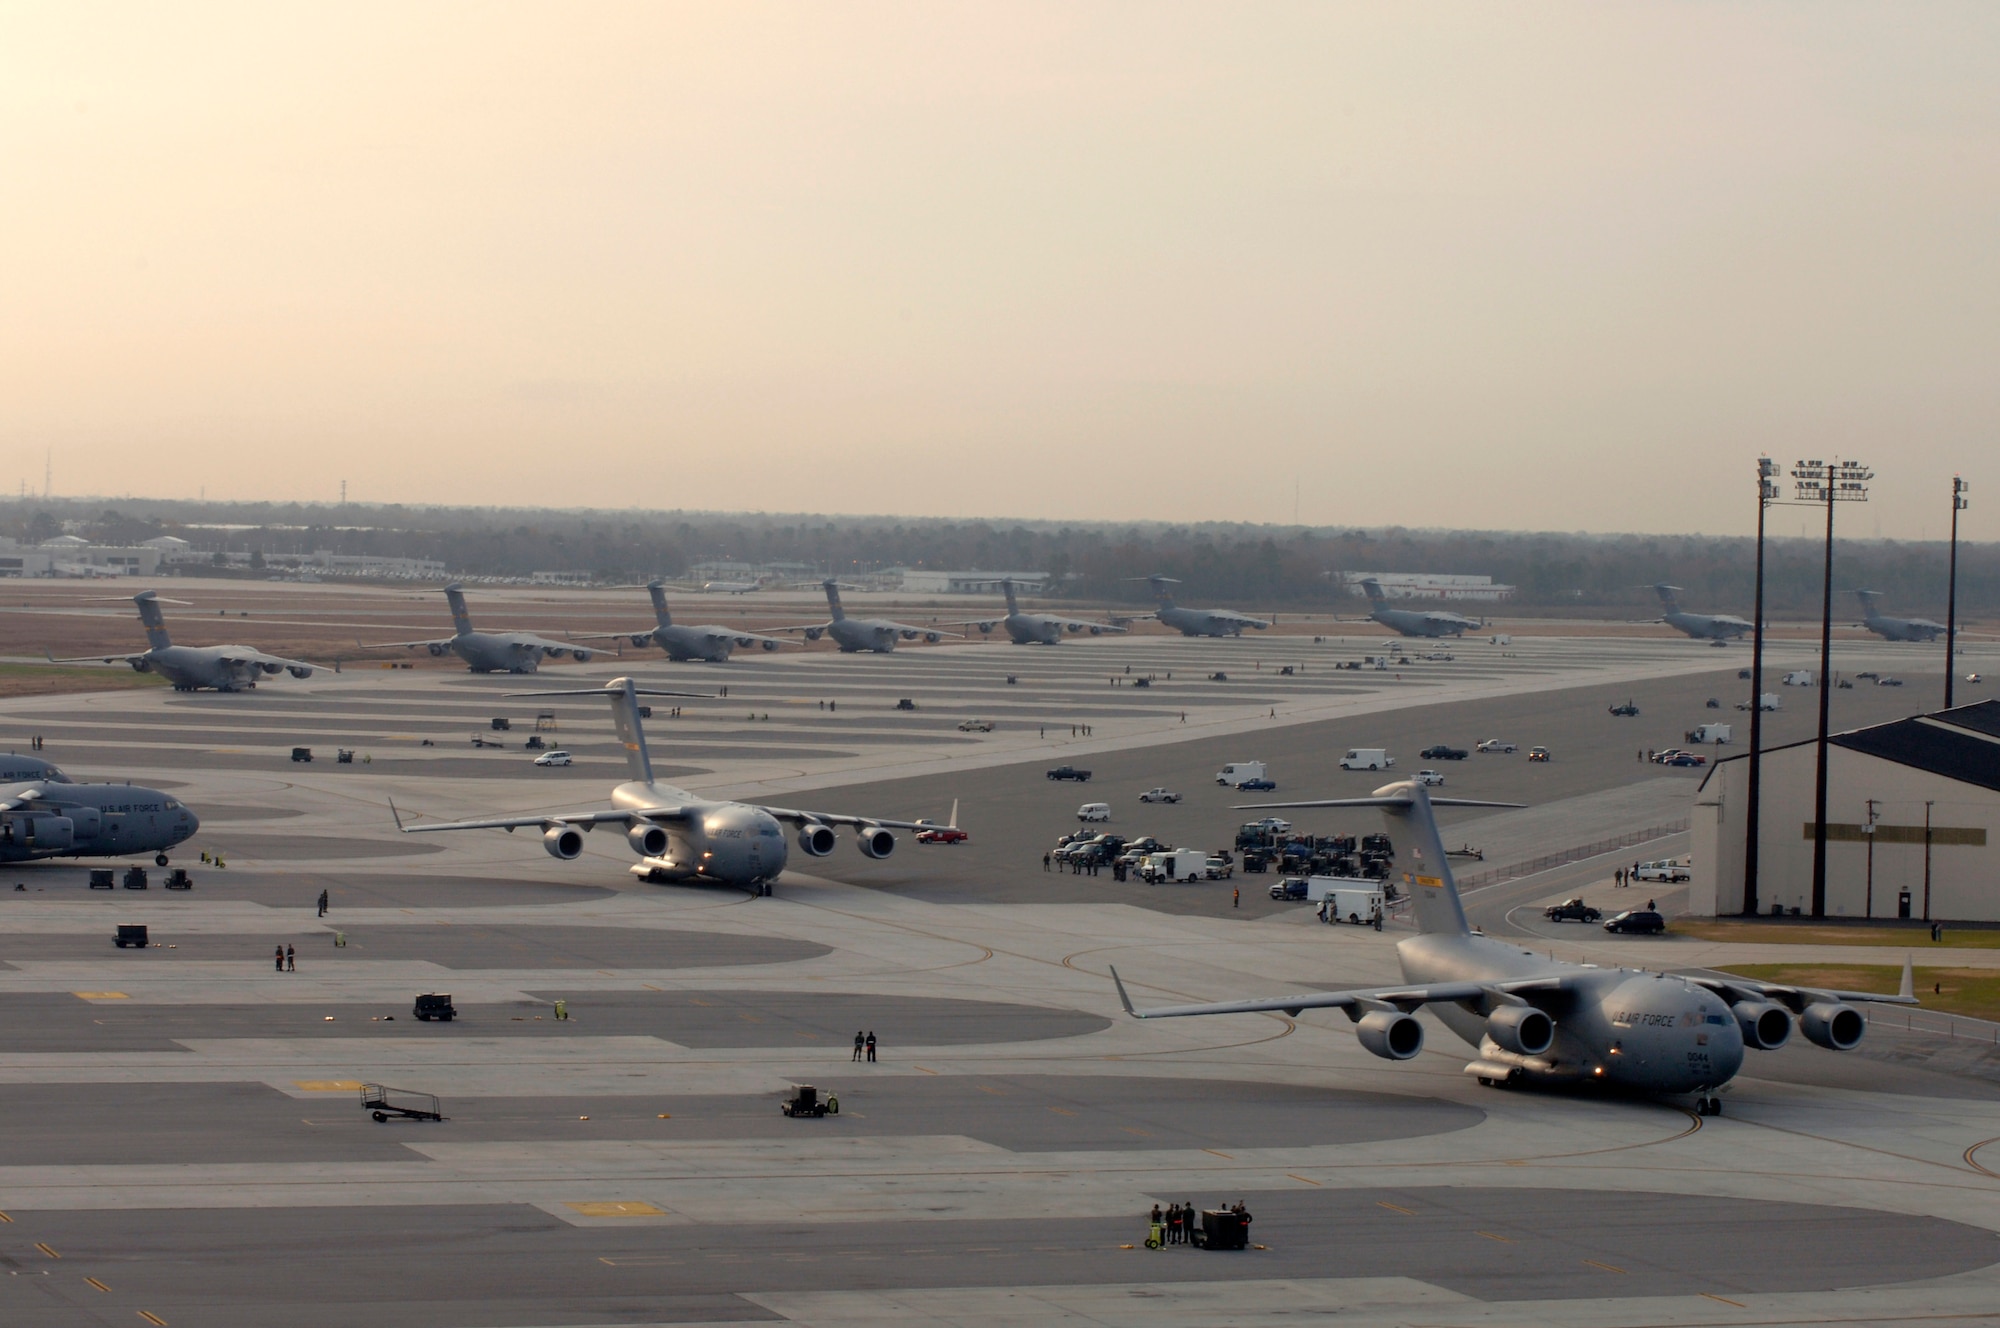 A line of C-17 Globemaster III's prepare to taxi Dec. 21 at Charleston Air Force Base, S.C. The C-17 is capable of rapid, strategic delivery of troops and all types of cargo. The design of the aircraft allows it to operate on small, austere airfields. It can take off and land on runways as short as 3,500 feet and 90 feet wide. (U.S. Air Force photo/Staff Sgt. April Quintanilla) 
